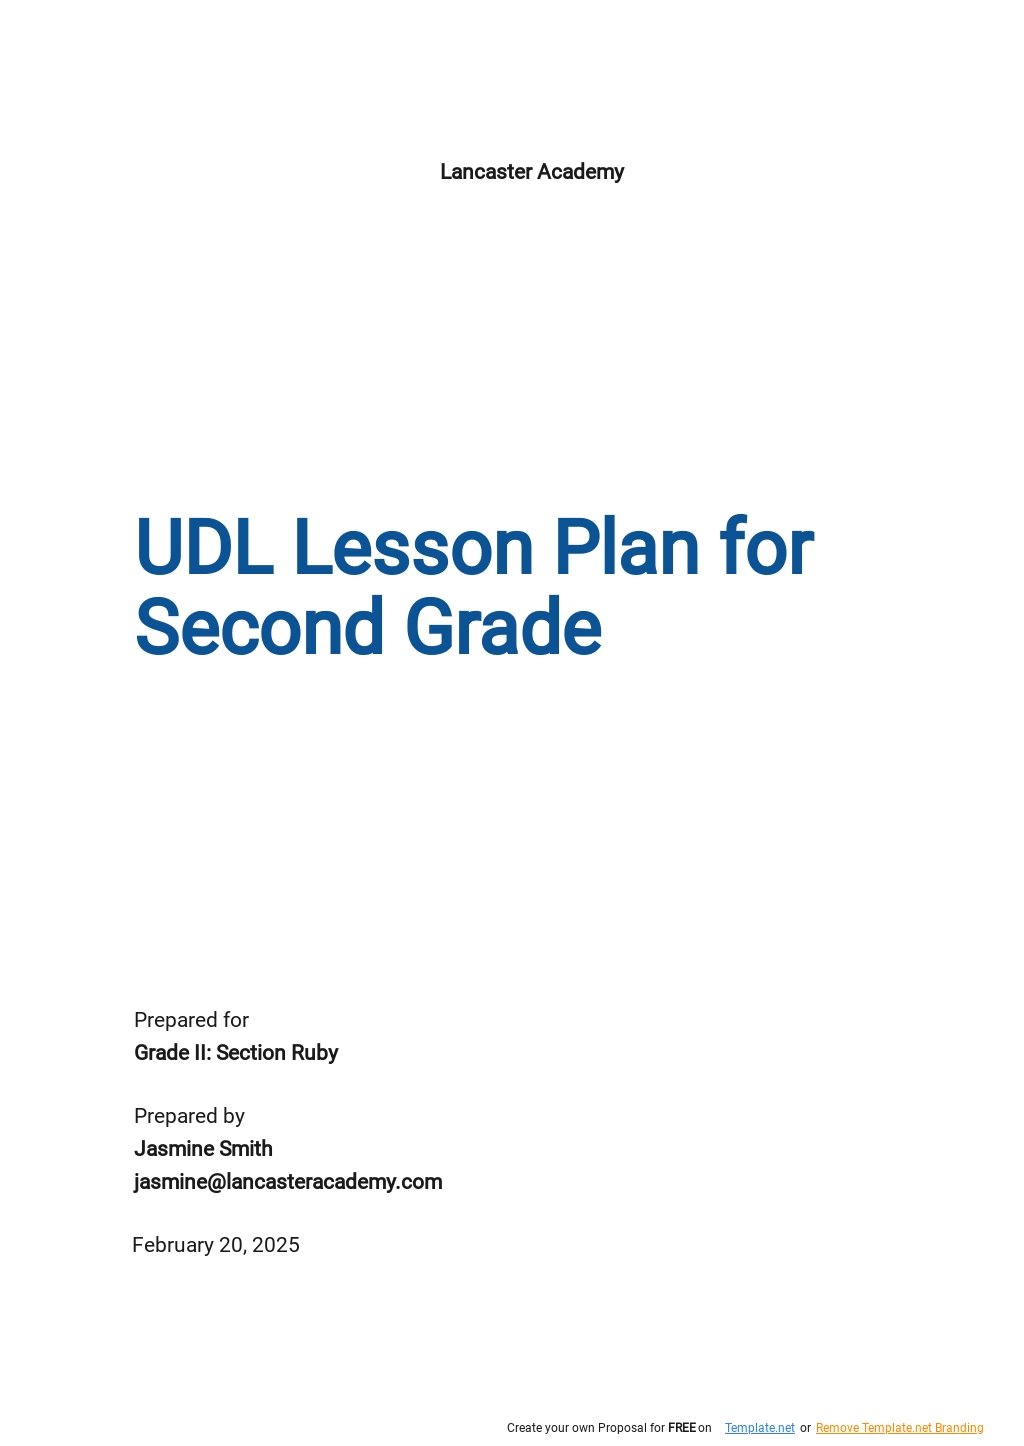 UDL Lesson Plans for Second Grade Template.jpe